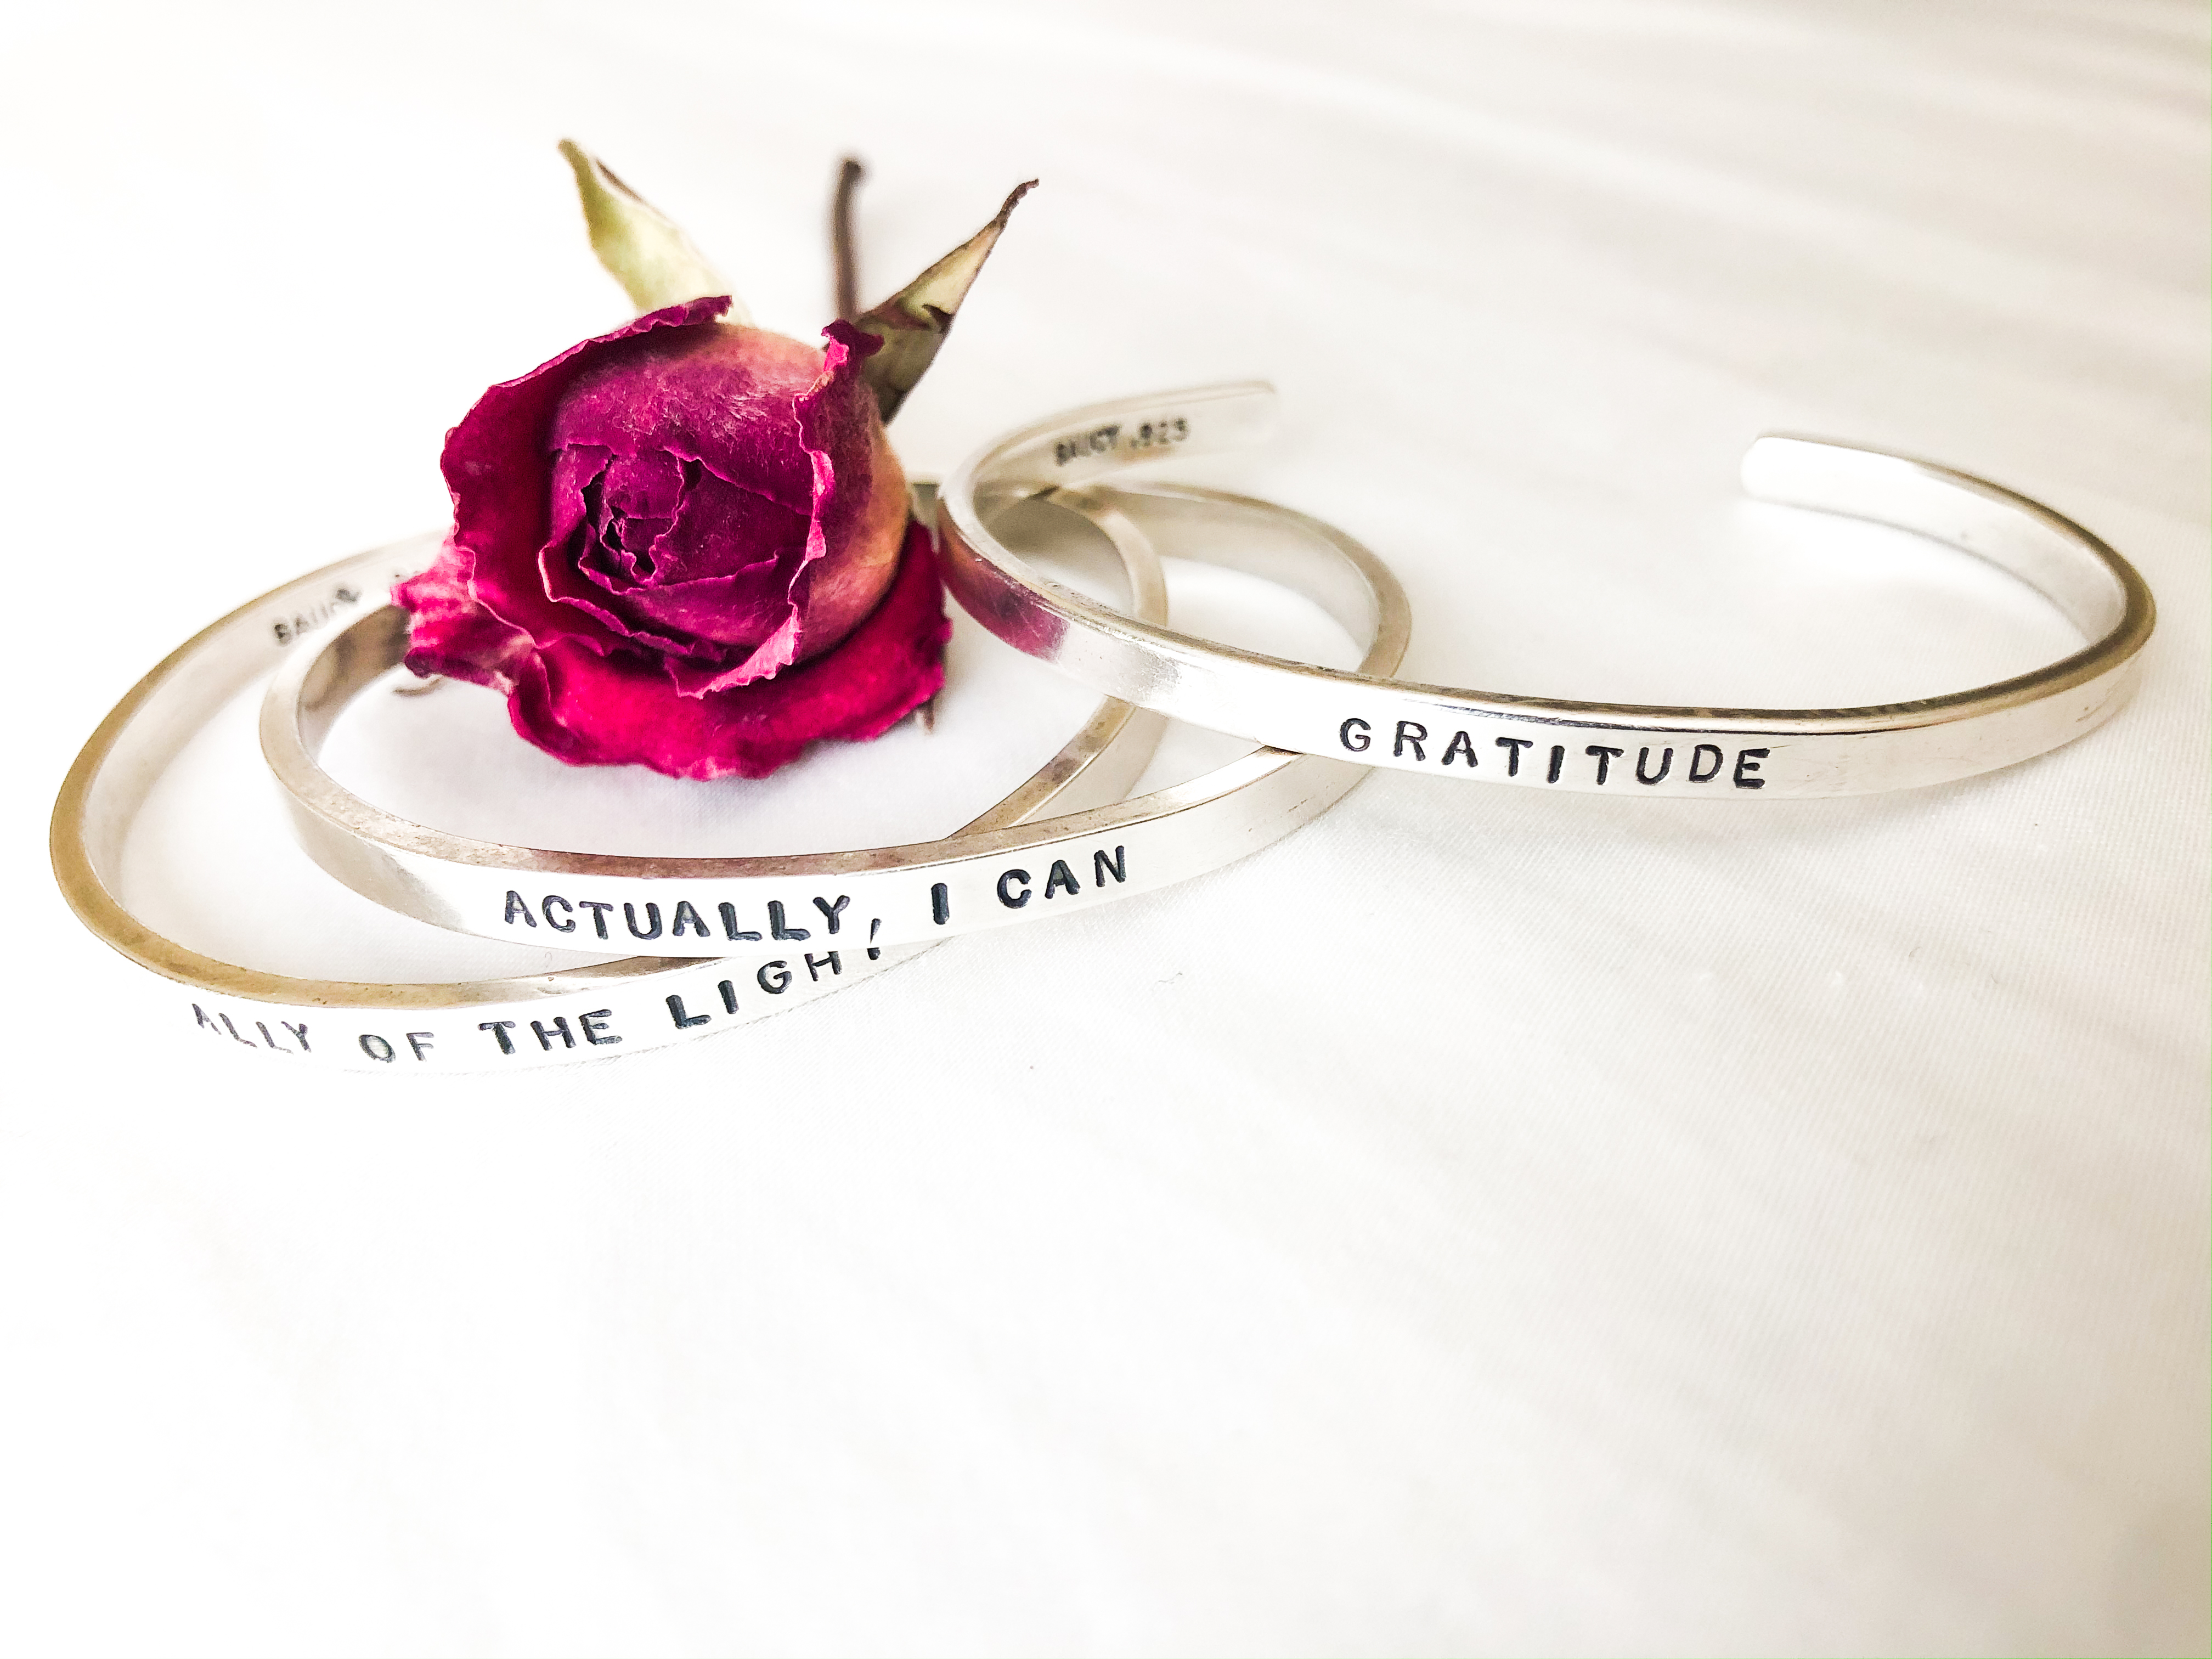 Saucy Jewelry Affirmation Cuffs when searching for 'Affirmation Cuffs'